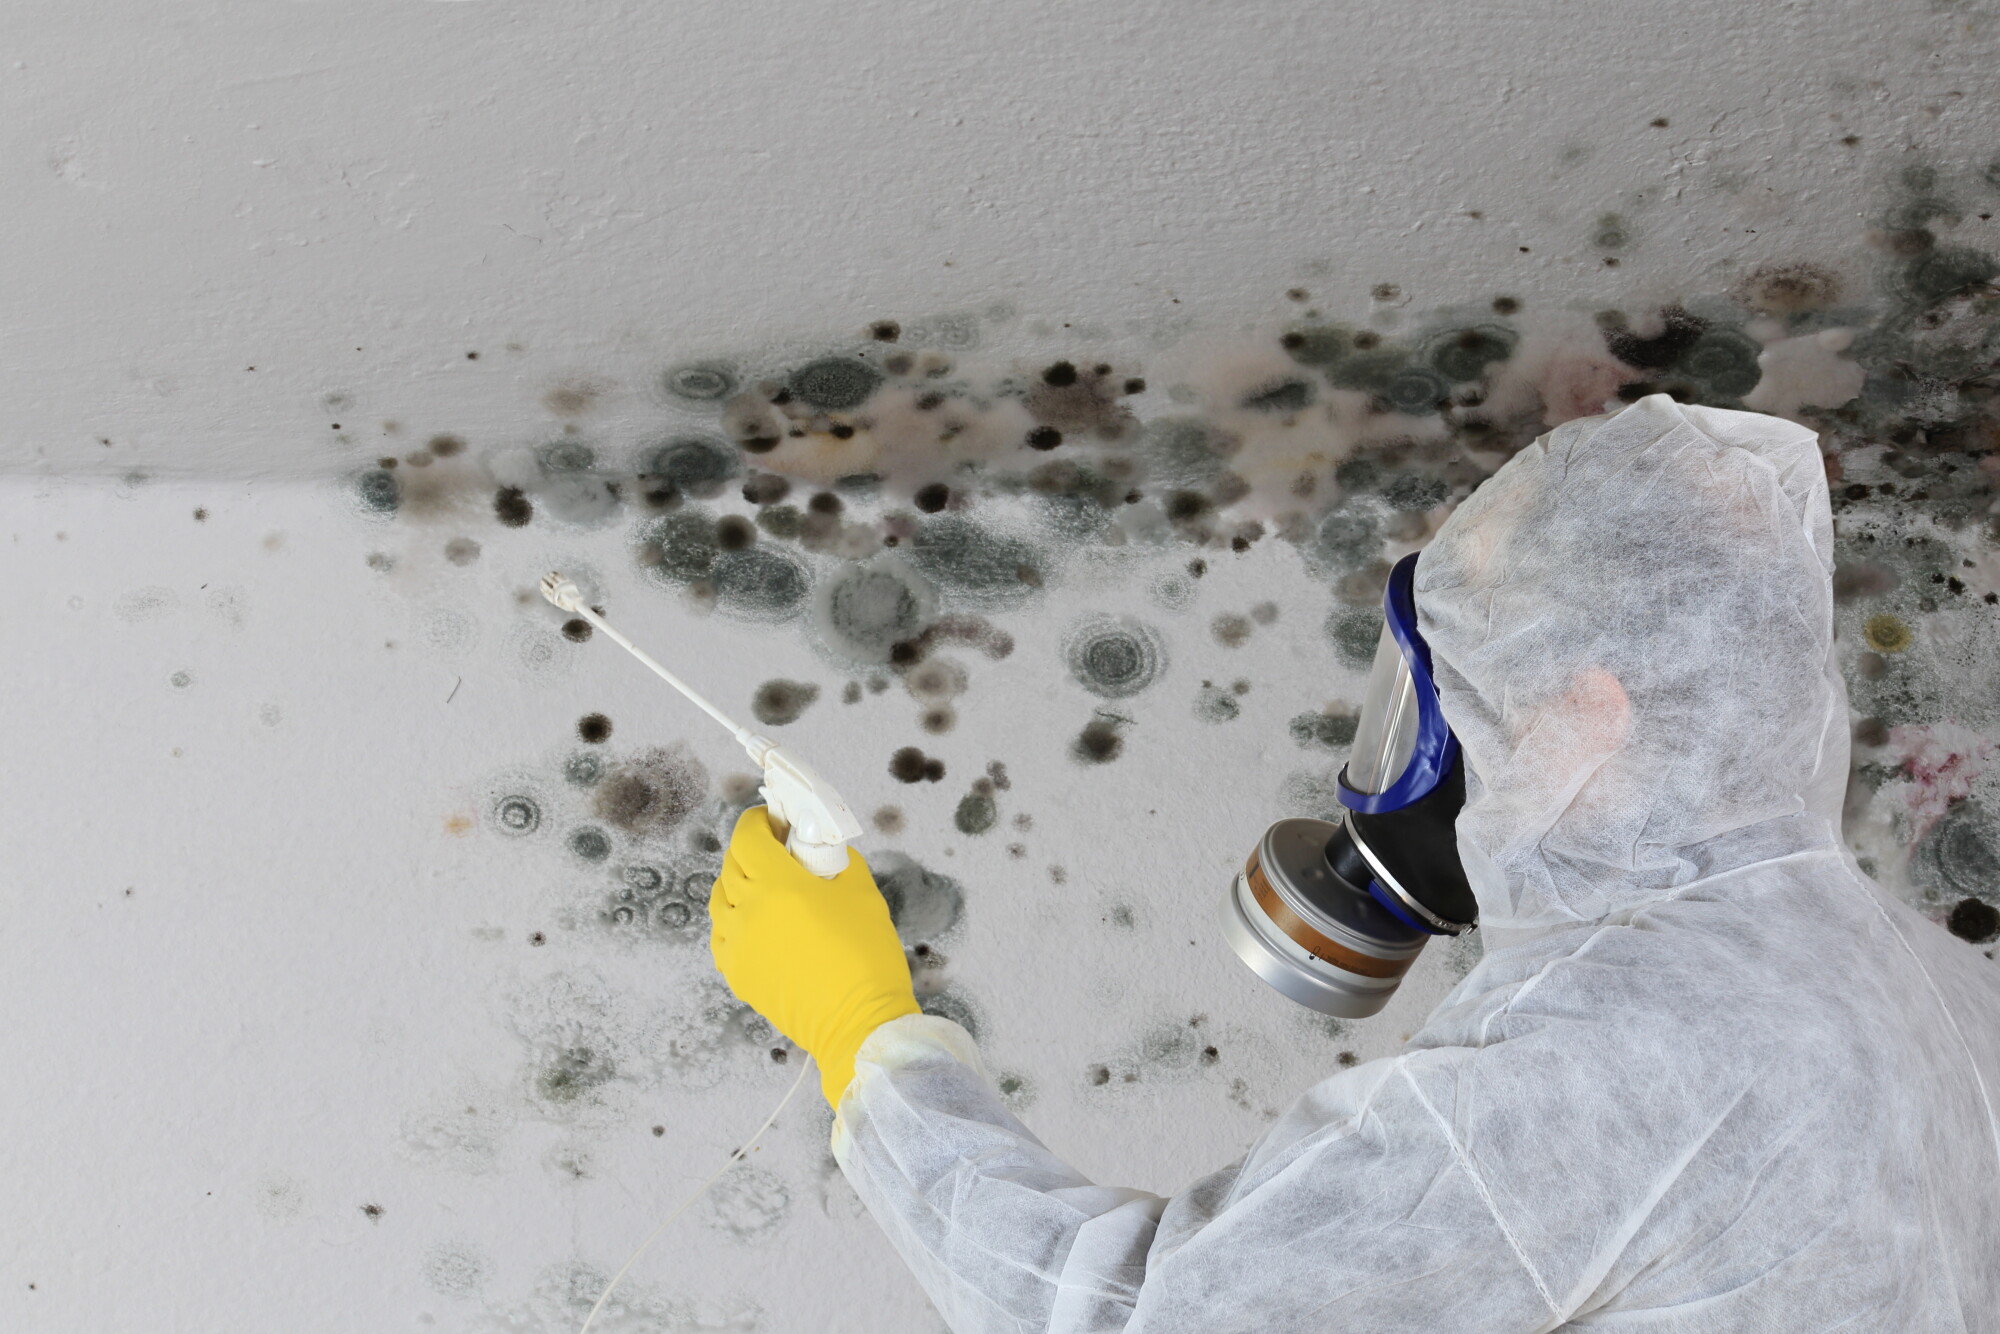 How Much Does Mold Remediation Cost?